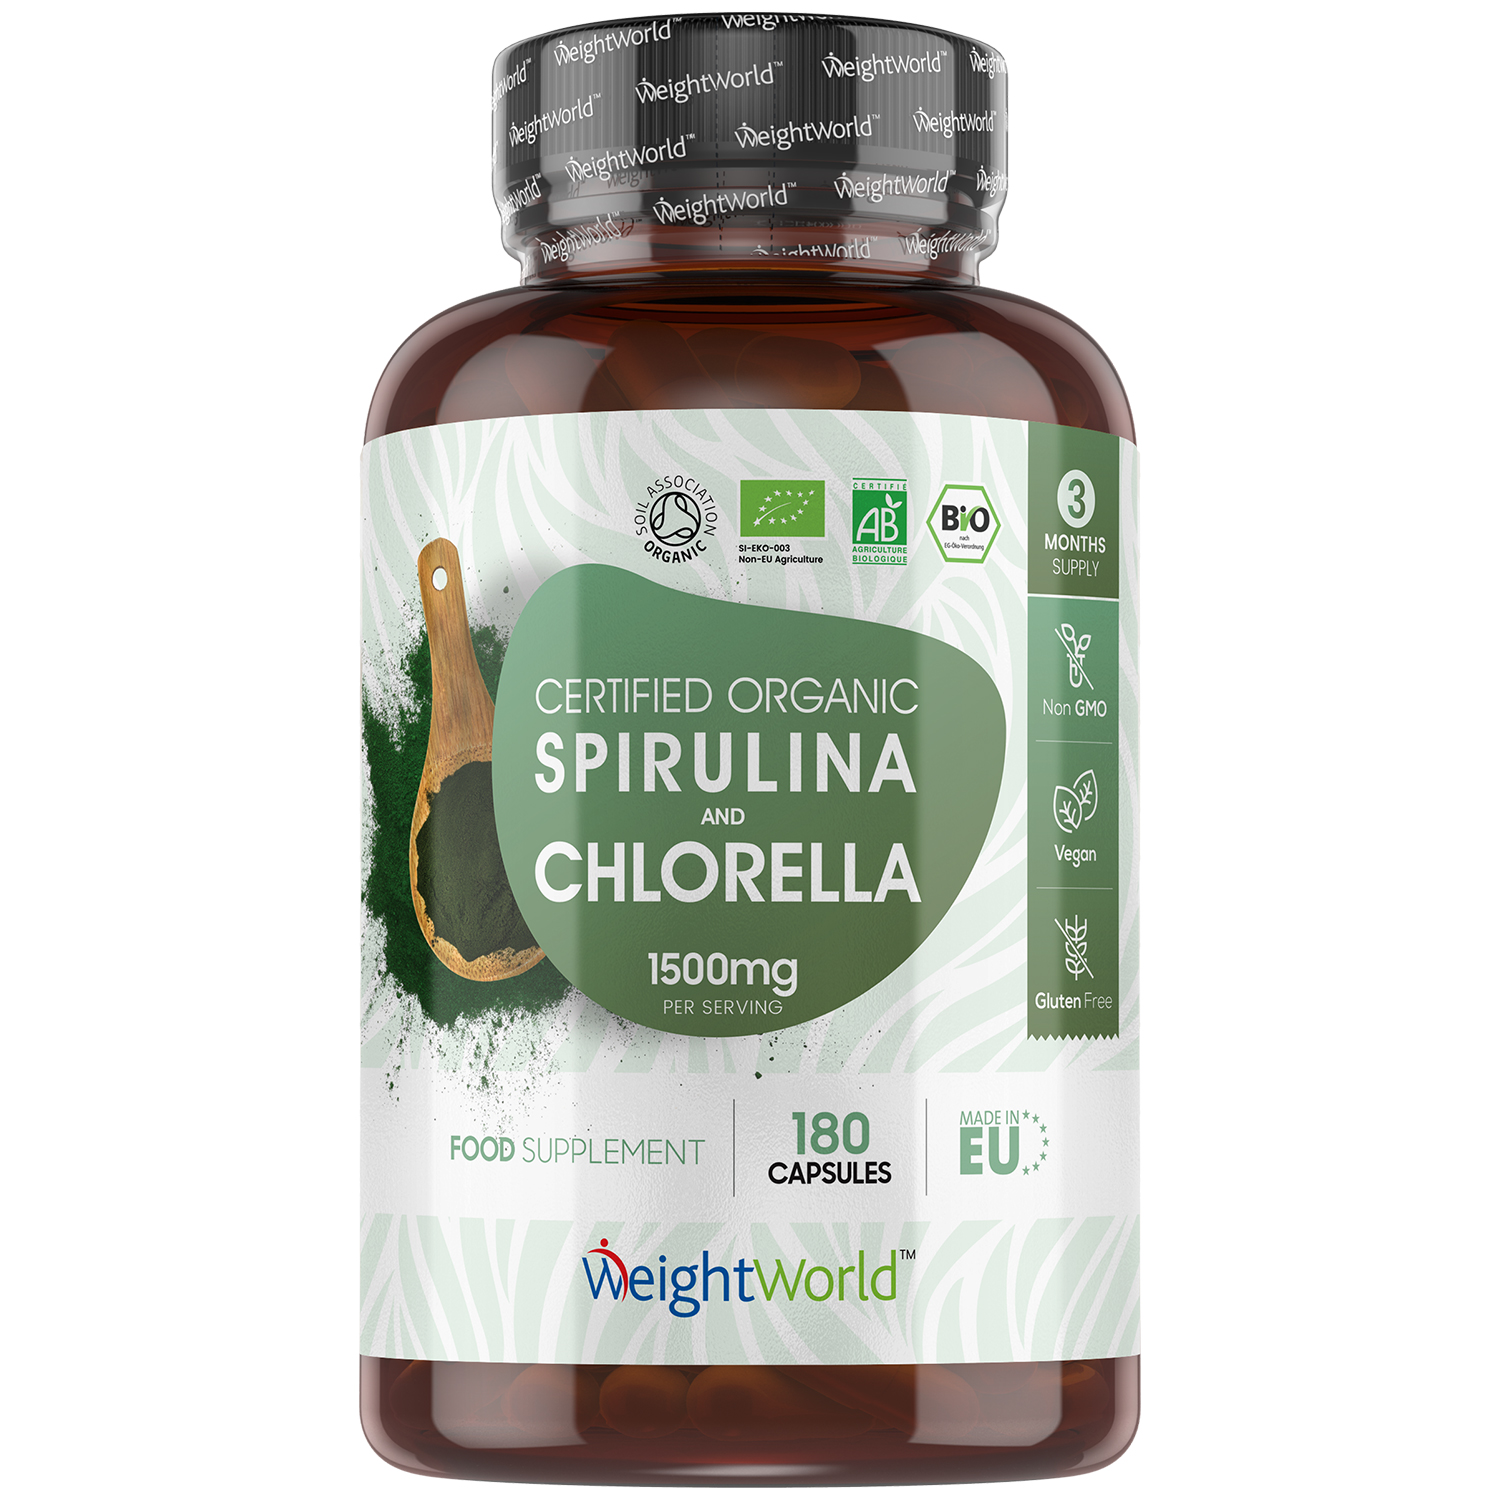 Organic Spirulina and Chlorella 1500mg Capsules - Superfood Supplement for Health & Wellbeing